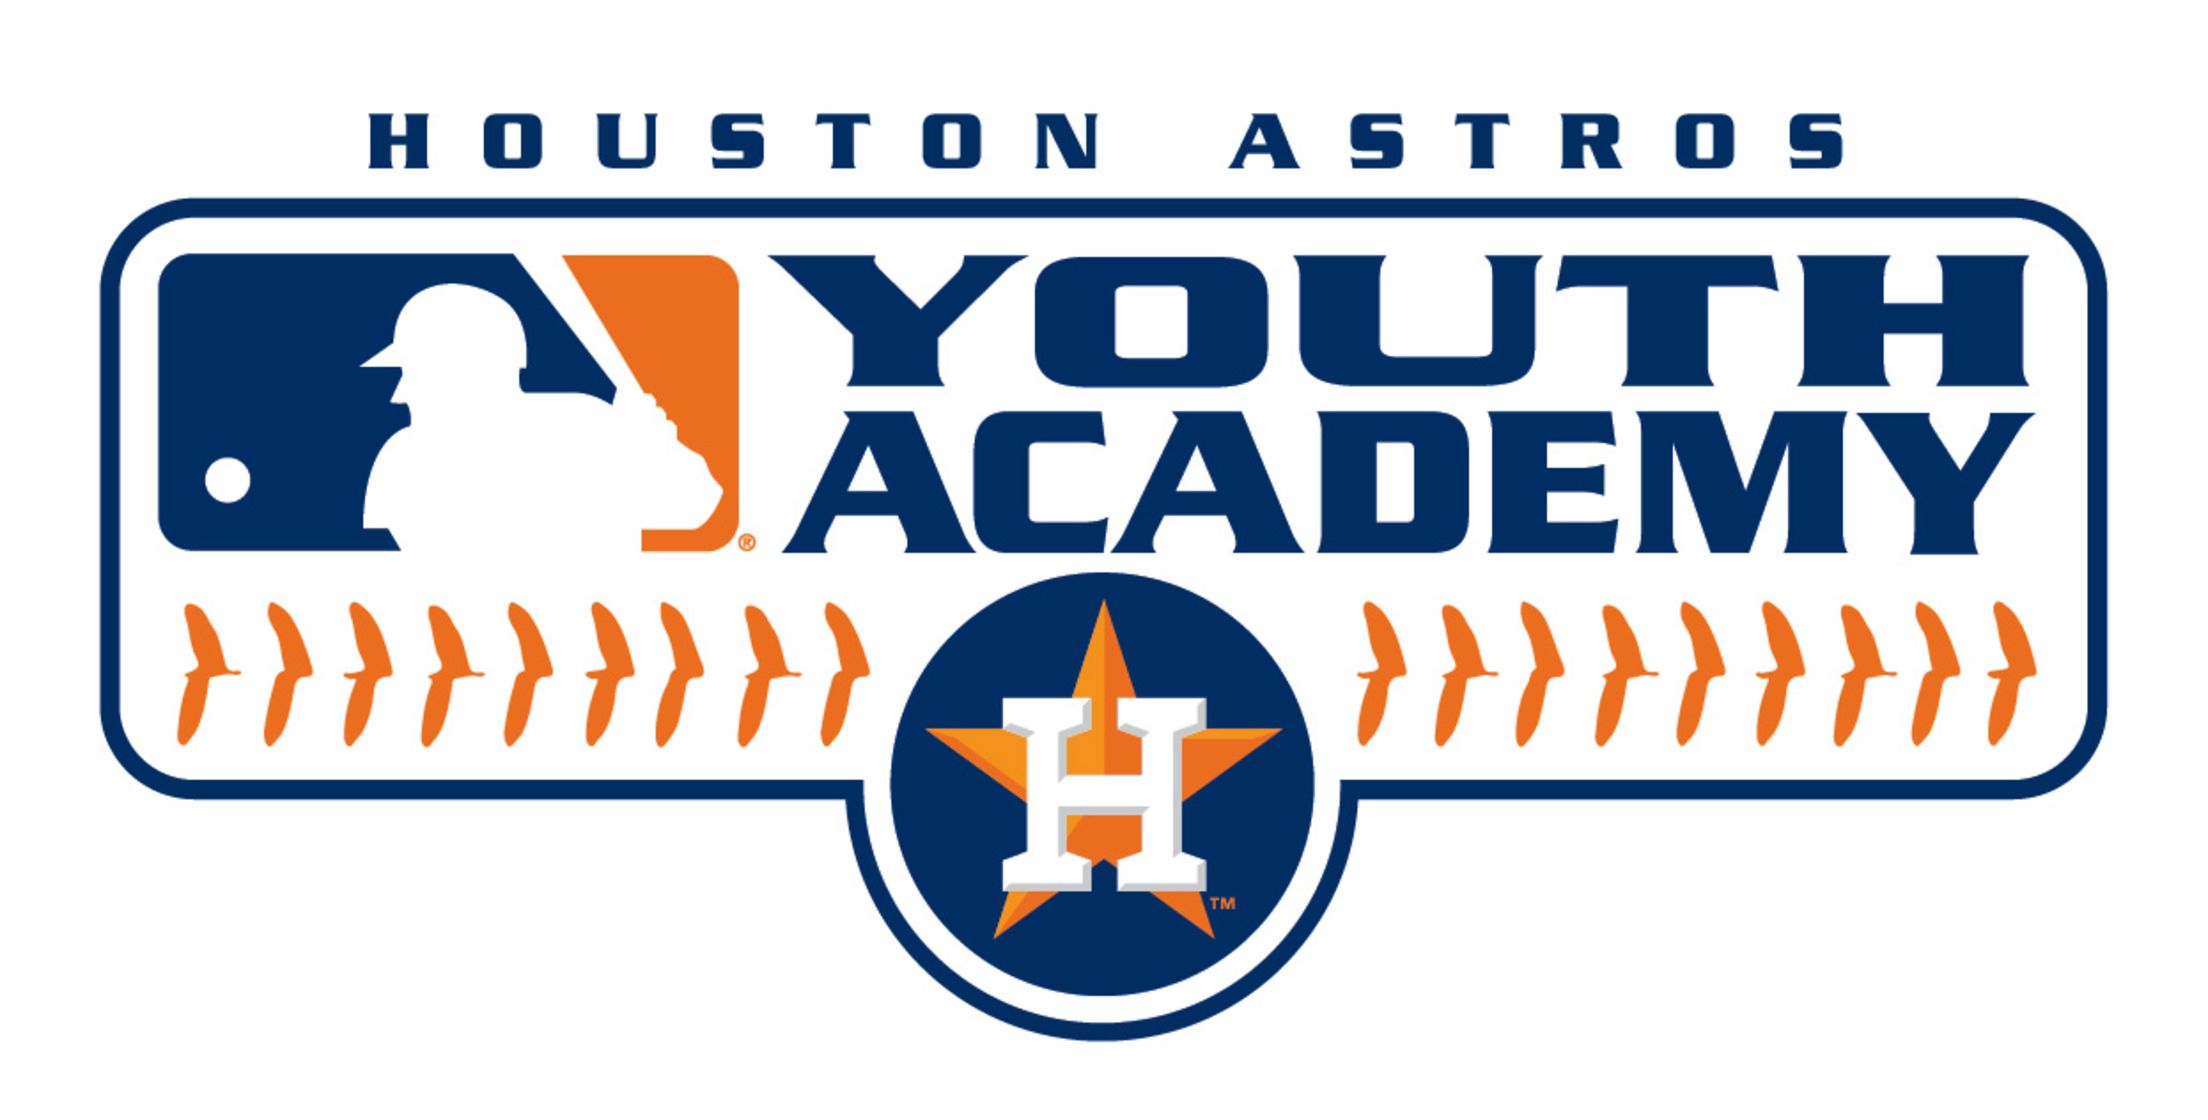 Astros players visit youth academy, participate in drills - ABC13